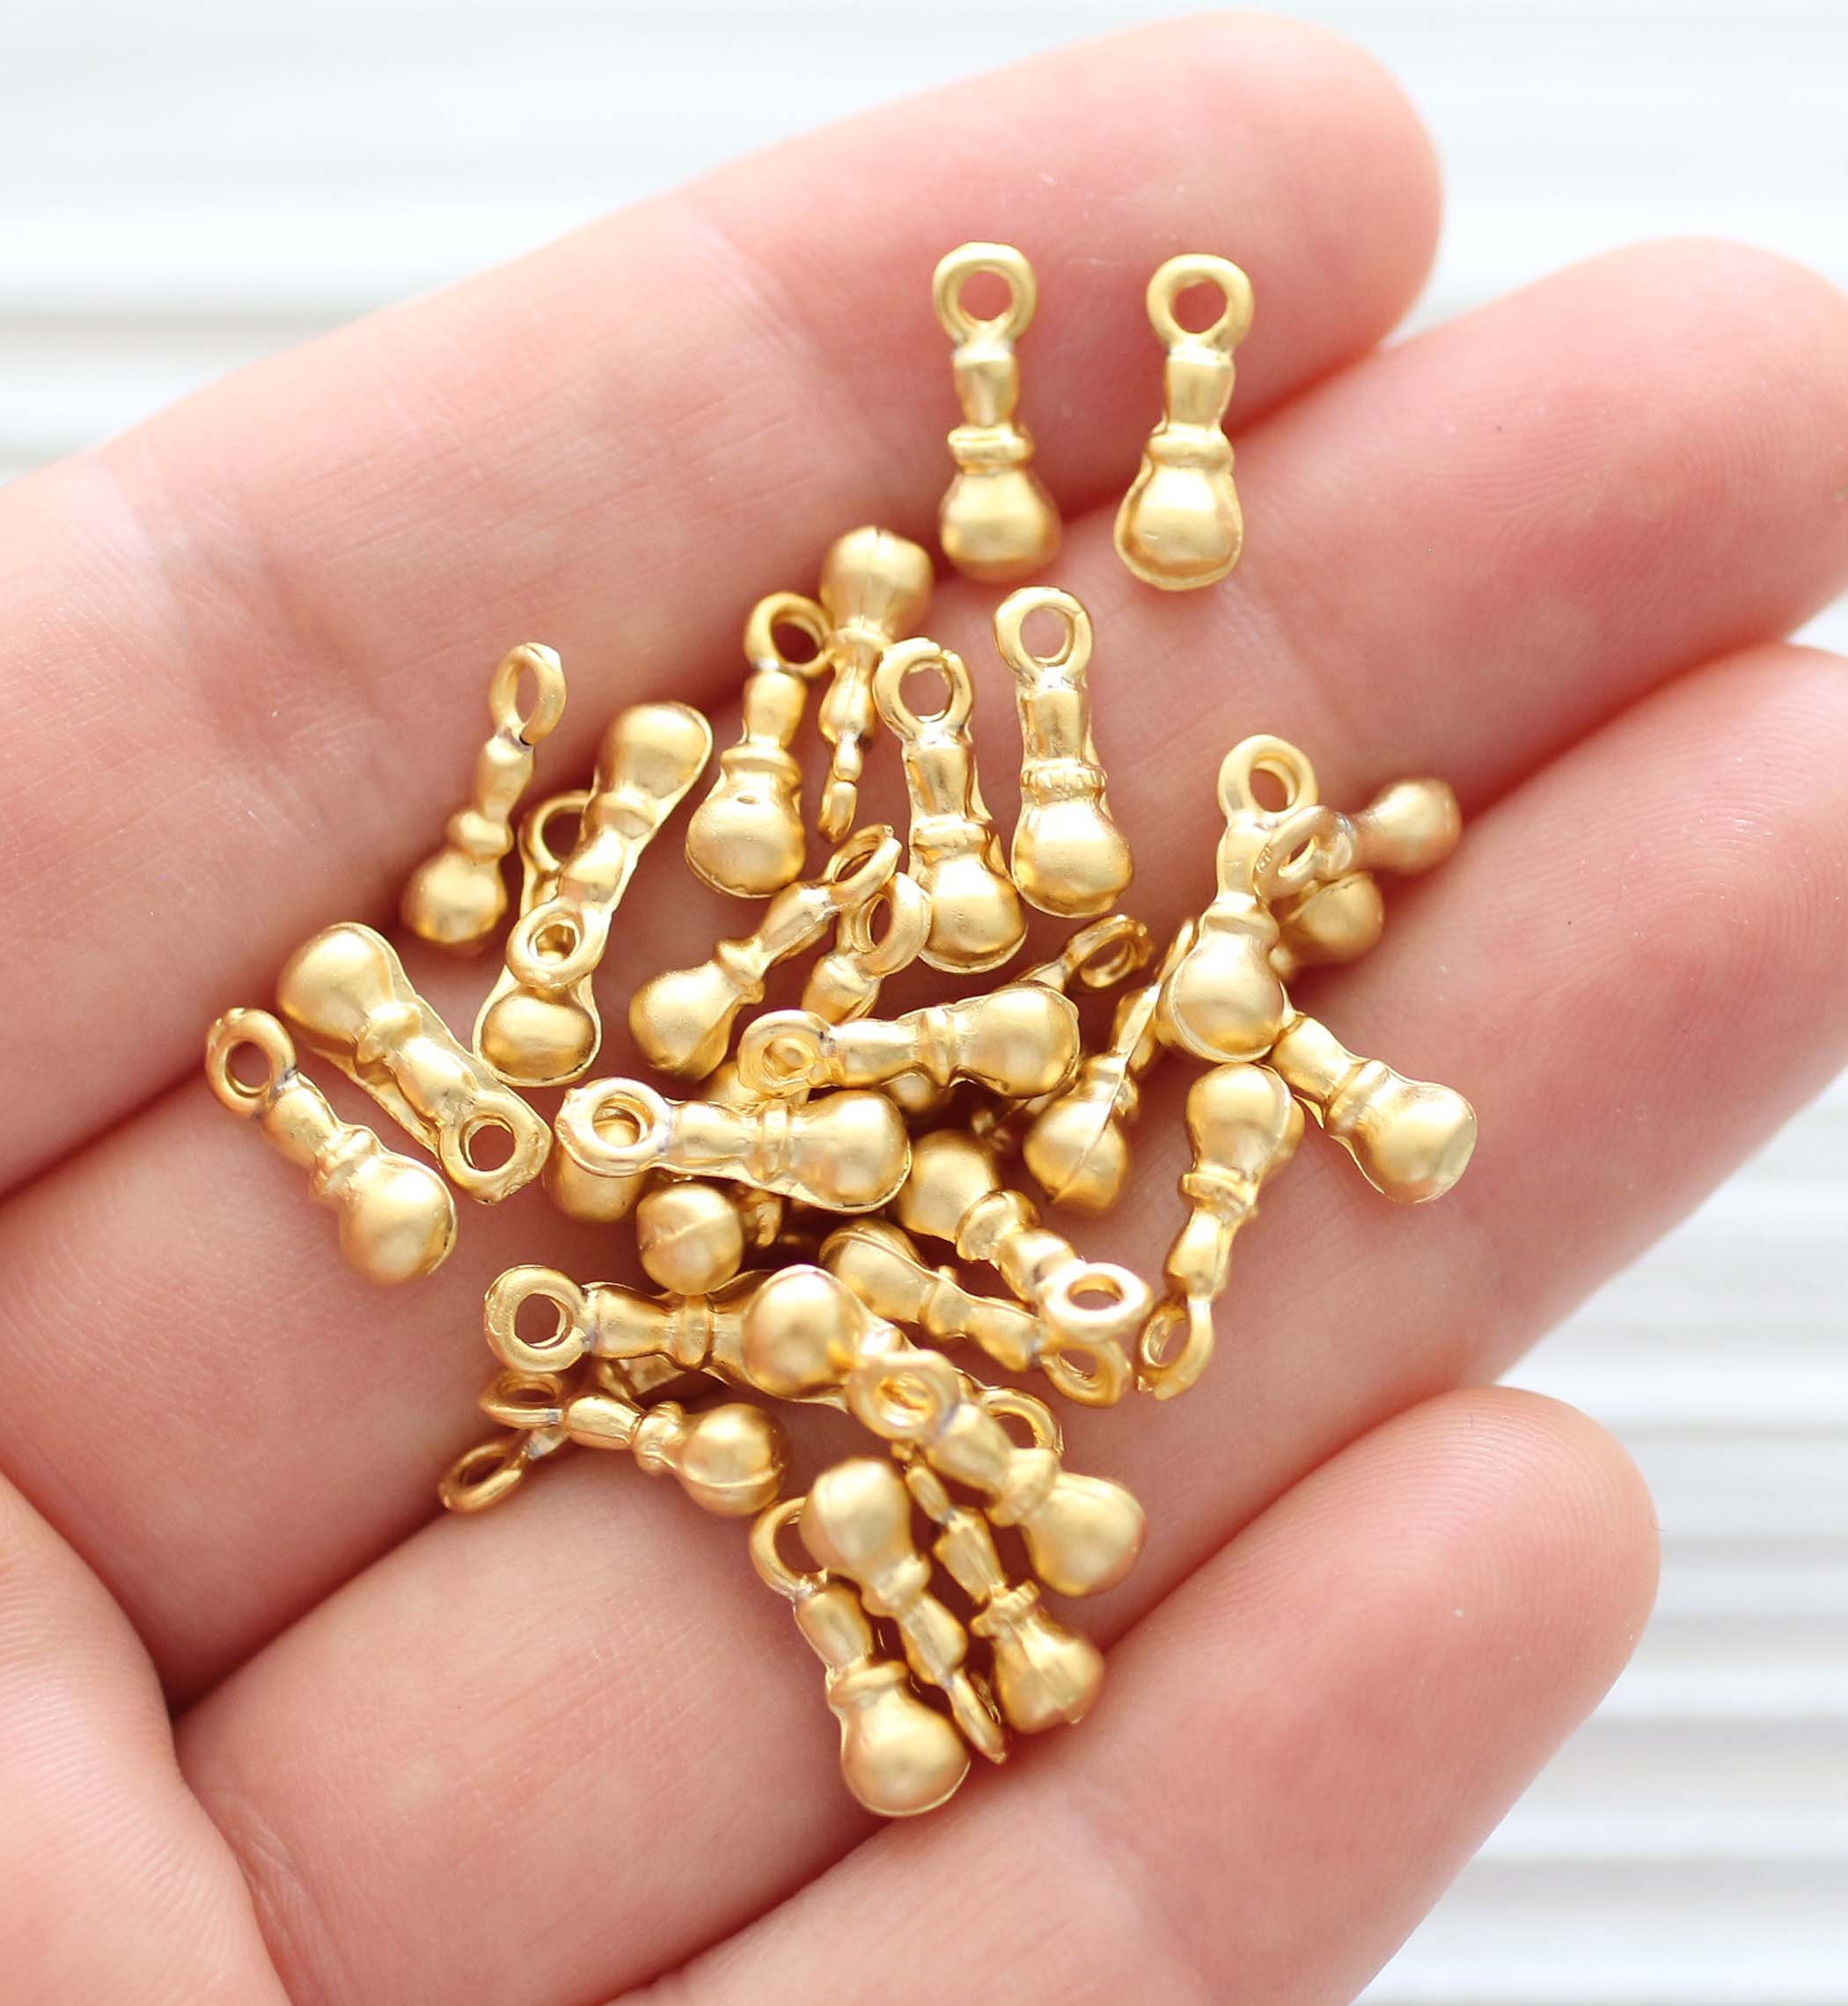 10pc gold stick charms, earring charms, spike charm, gold metal